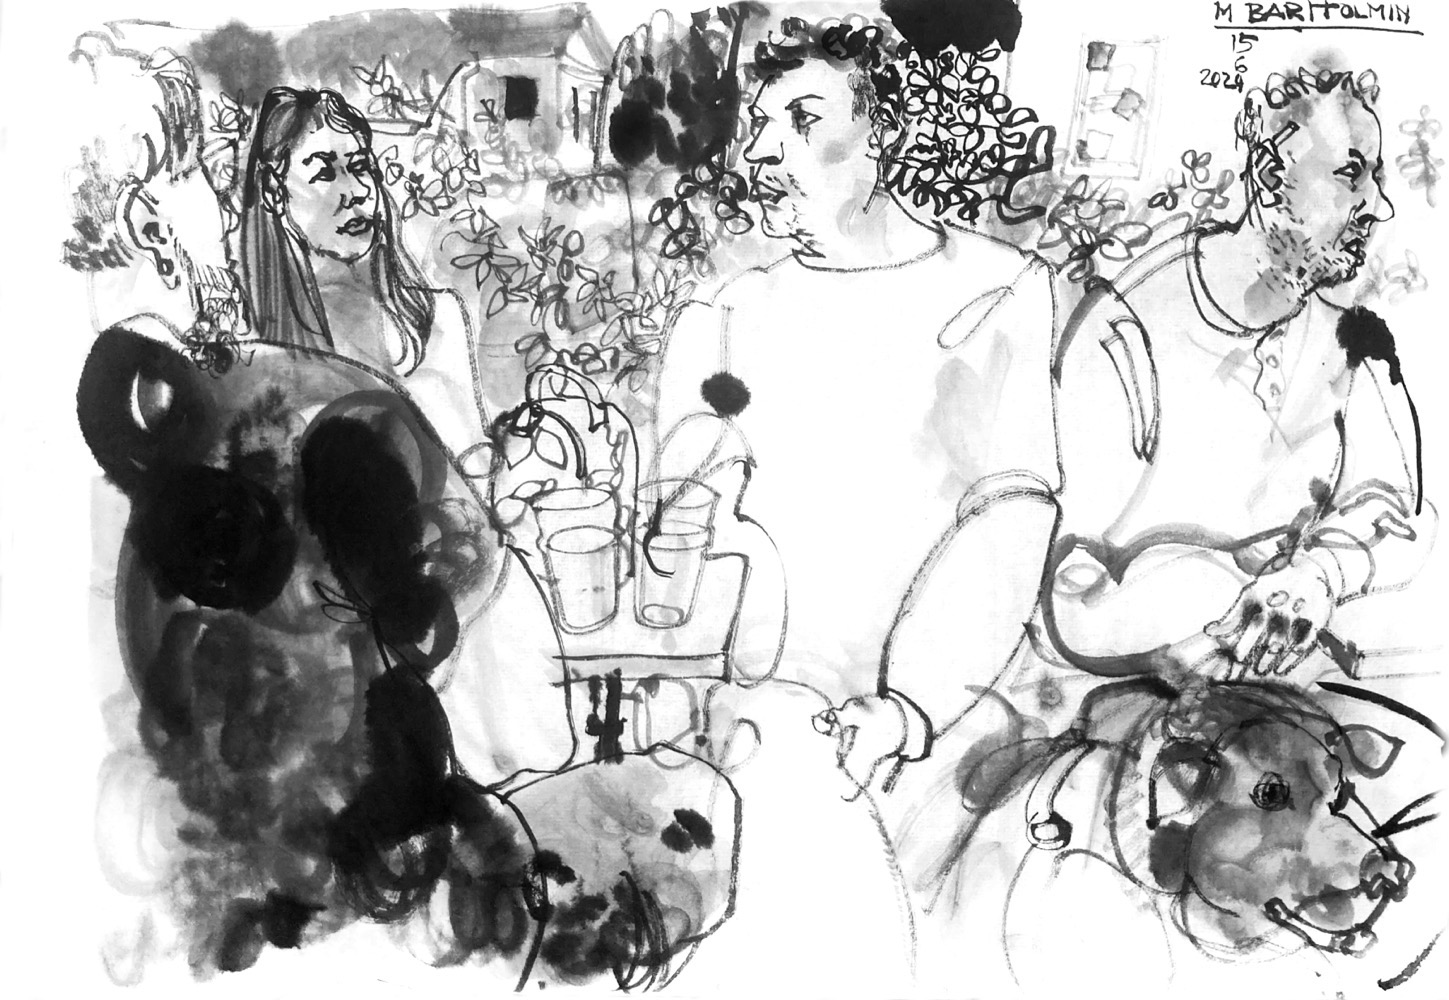 Ink drawing of guests in front of a café/bar